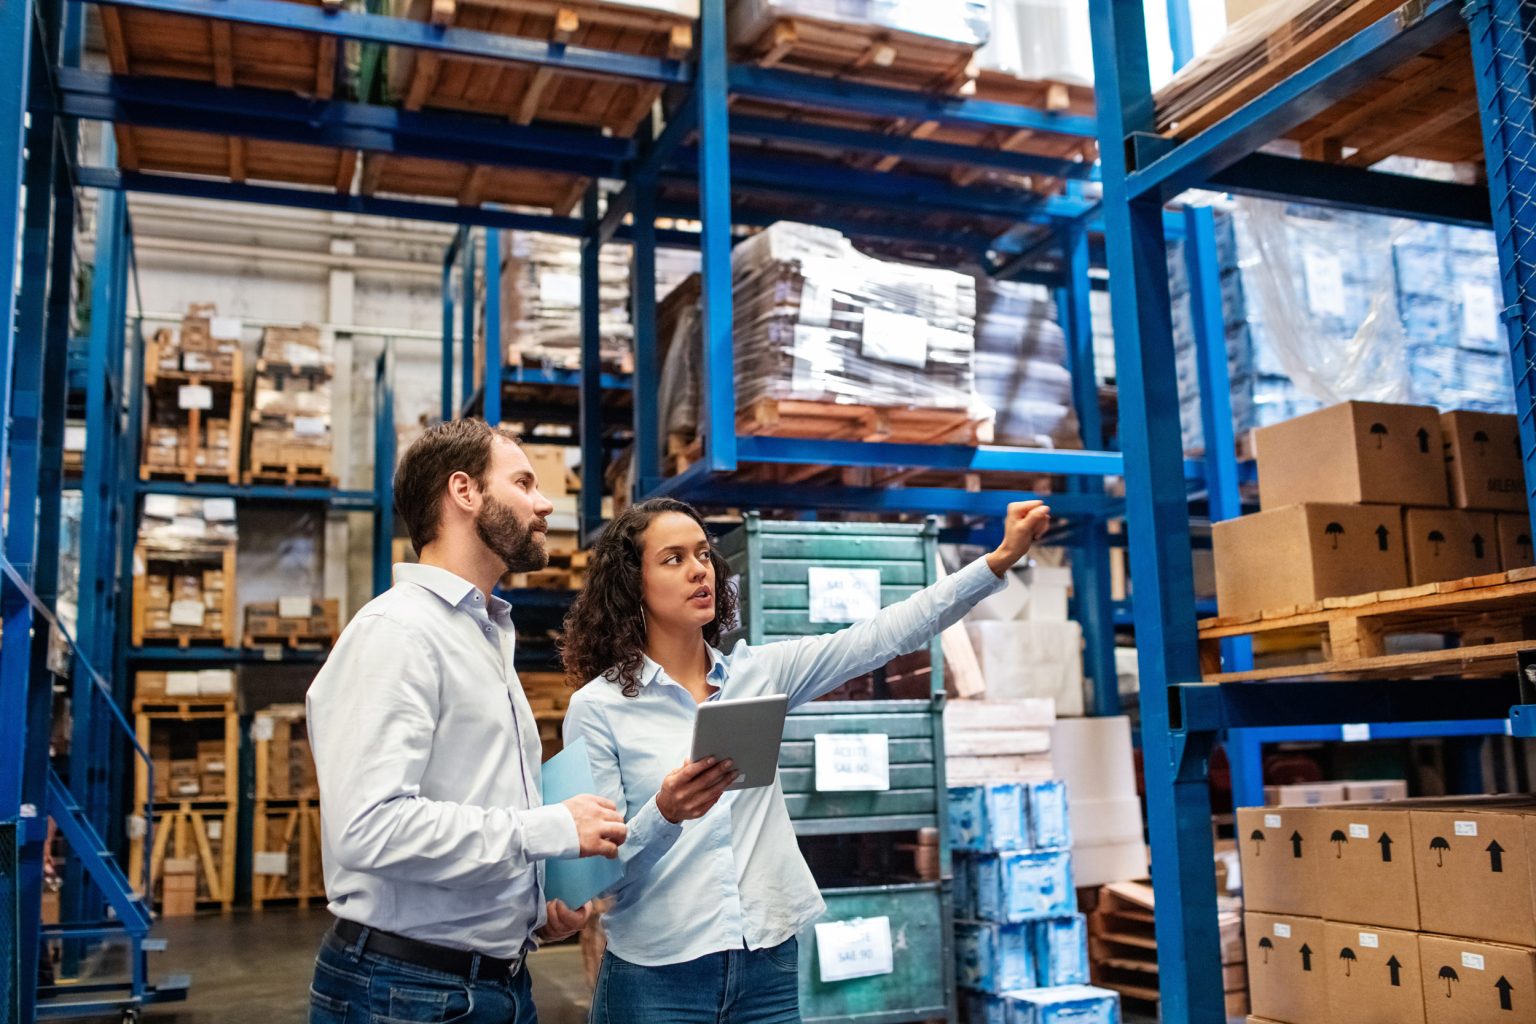 Two workers in a warehouse pointing at the shelves. The female worker is holding a tablet.